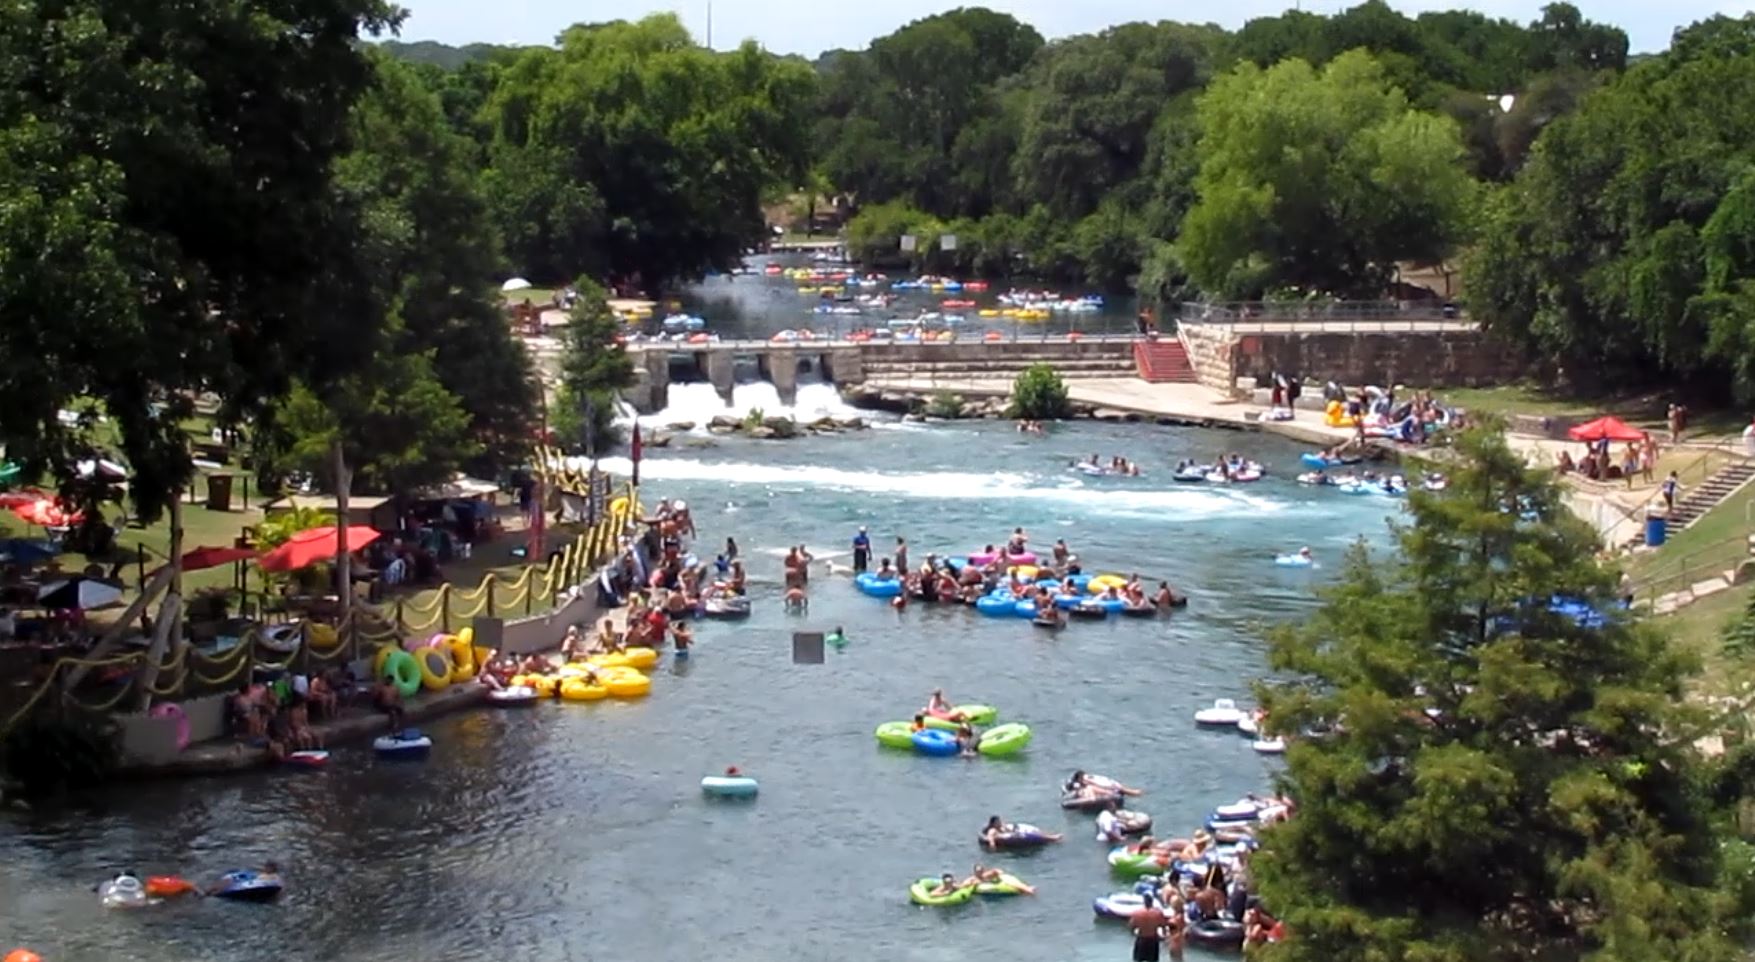 View of Clemens Dam and the New Braunfels Tube Chute on the Comal River from the San Antonio Street Bridge with Texas Tubes